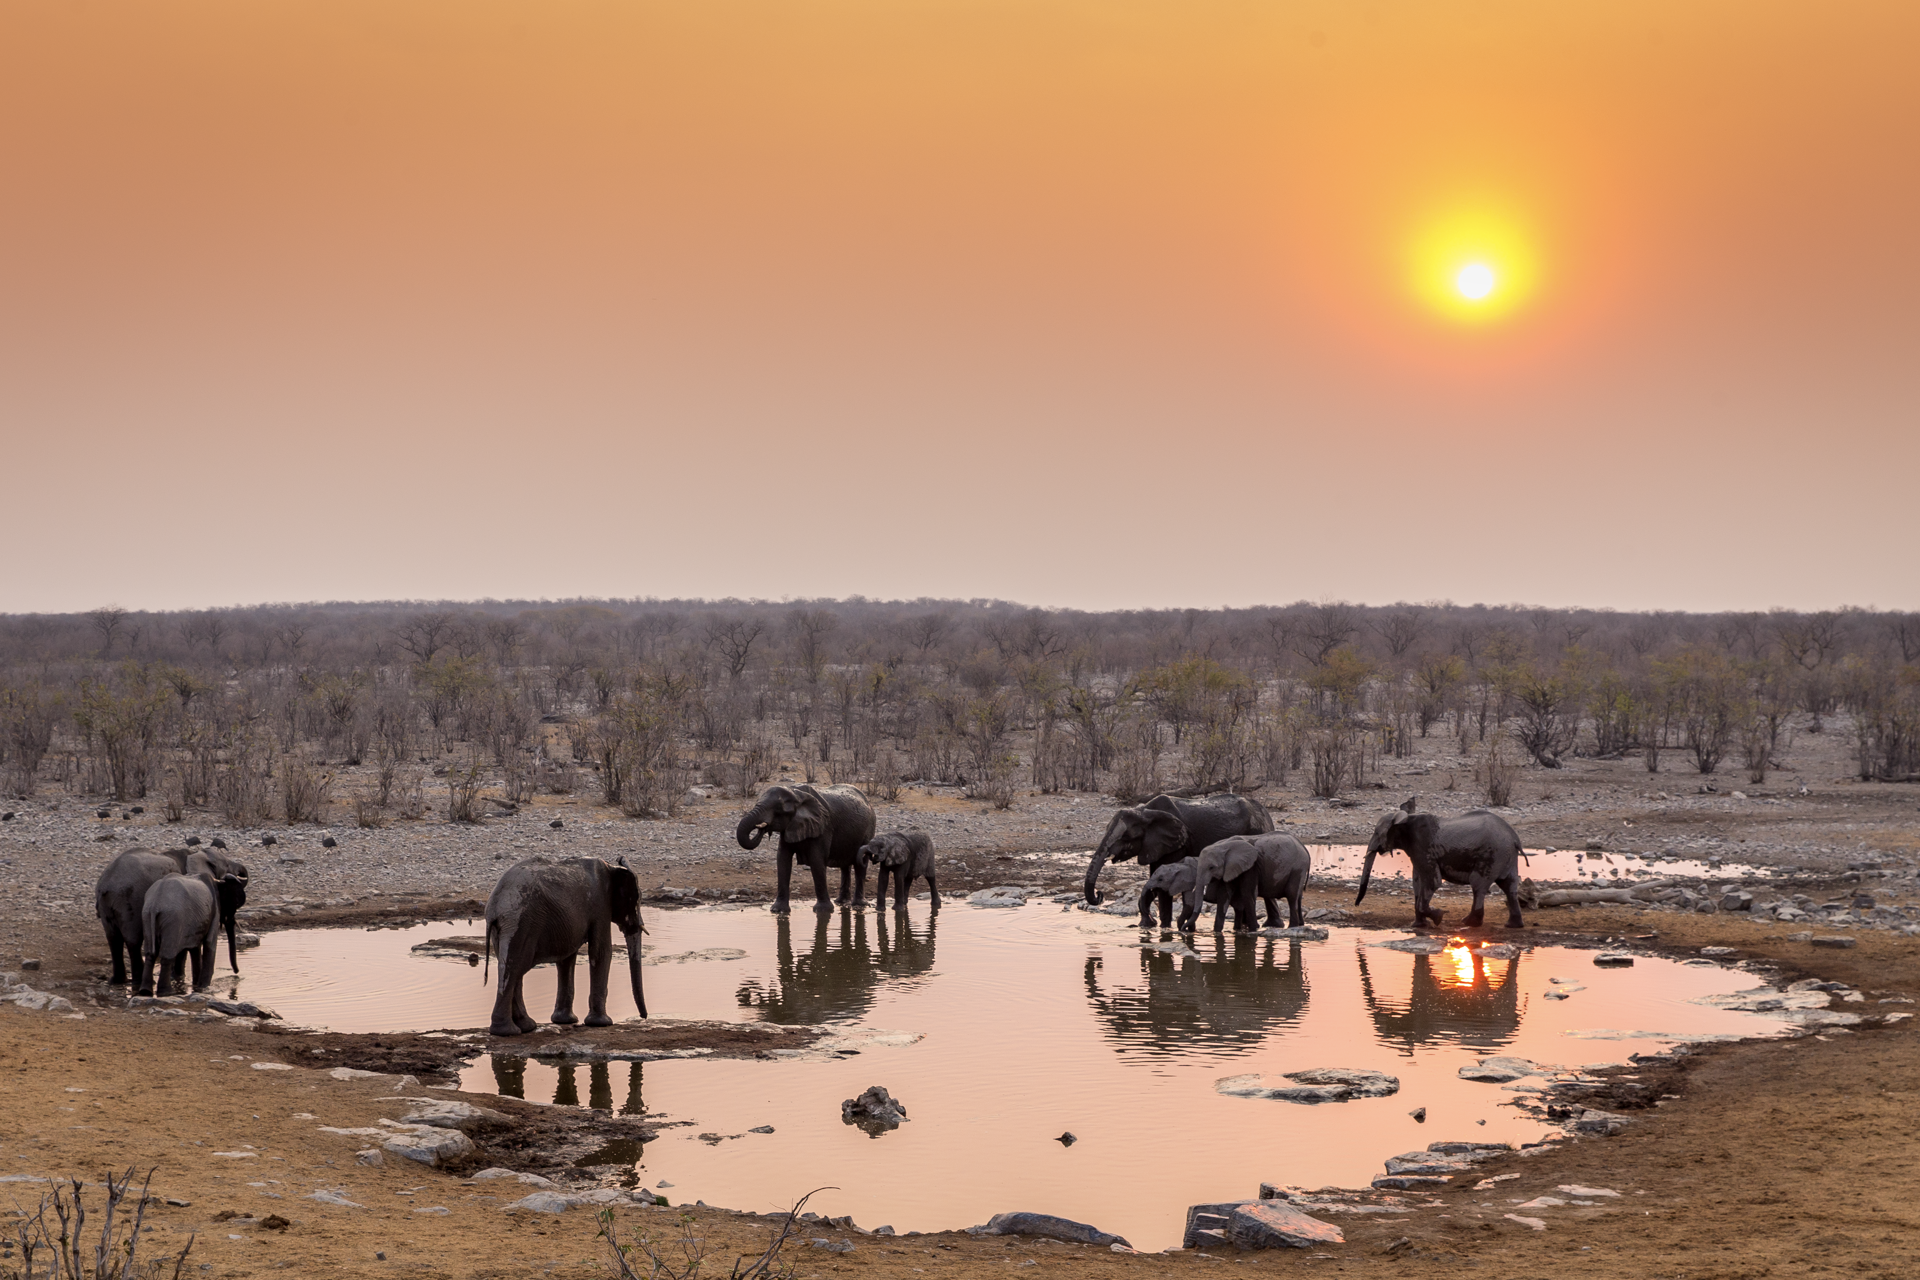 a herd of elephants drinking water from a puddle at sunset